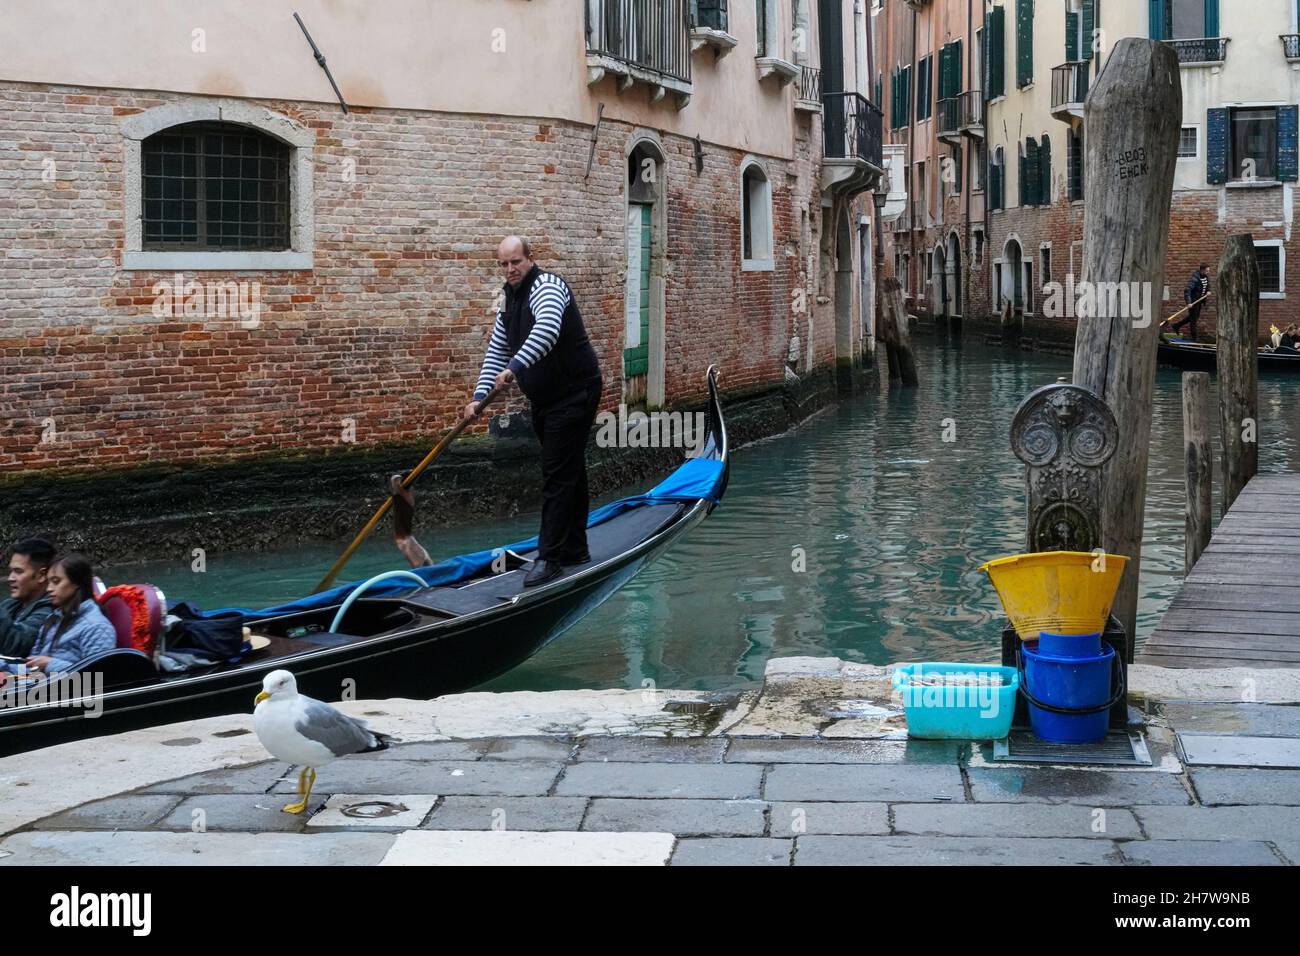 A gondola transports two tourists from Asia through a small canal in Venice. On the bank of the canal sits a seagull, at a fountain plastic bowls. Stock Photo